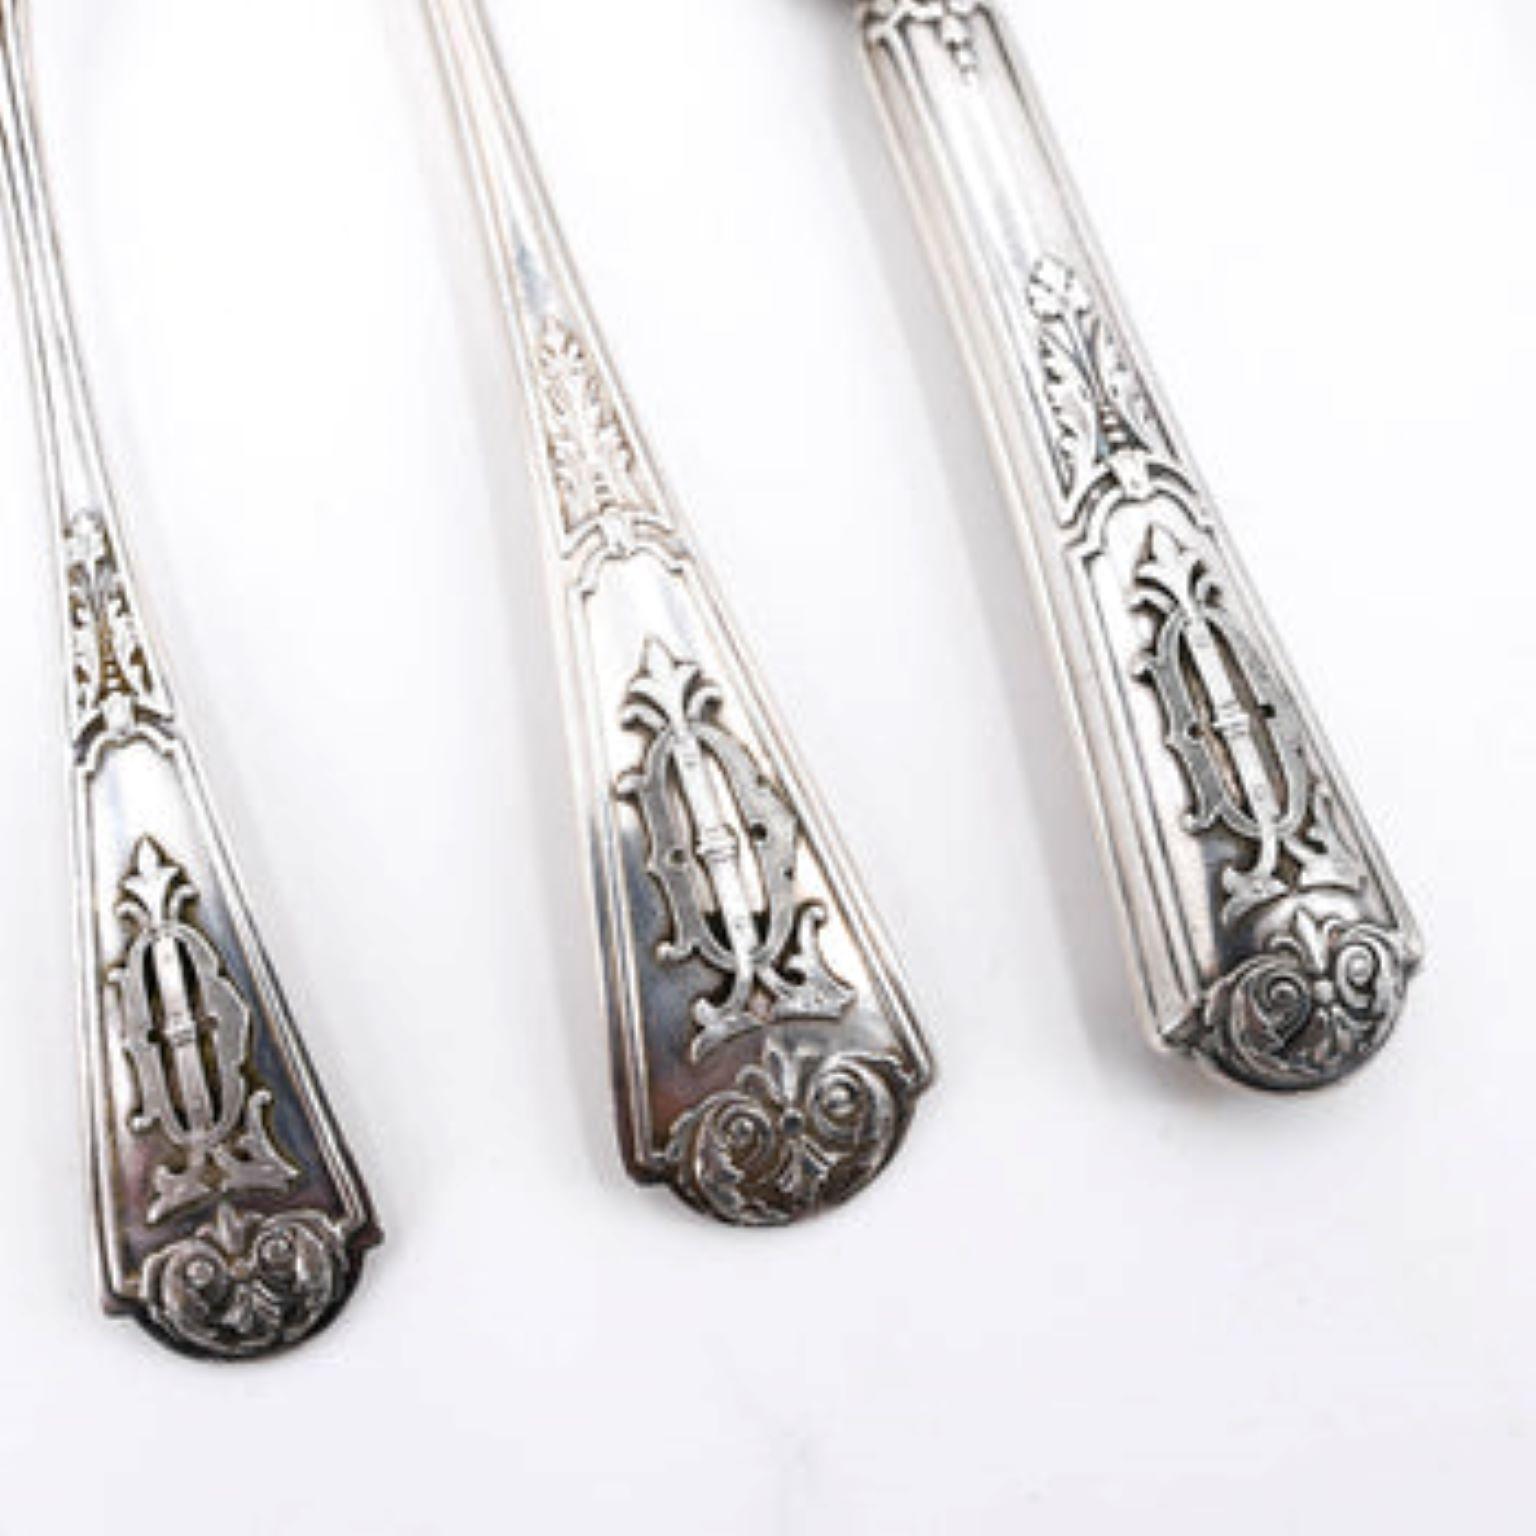 91 Piece Sterling Silver Flatware from Paris For Sale 1